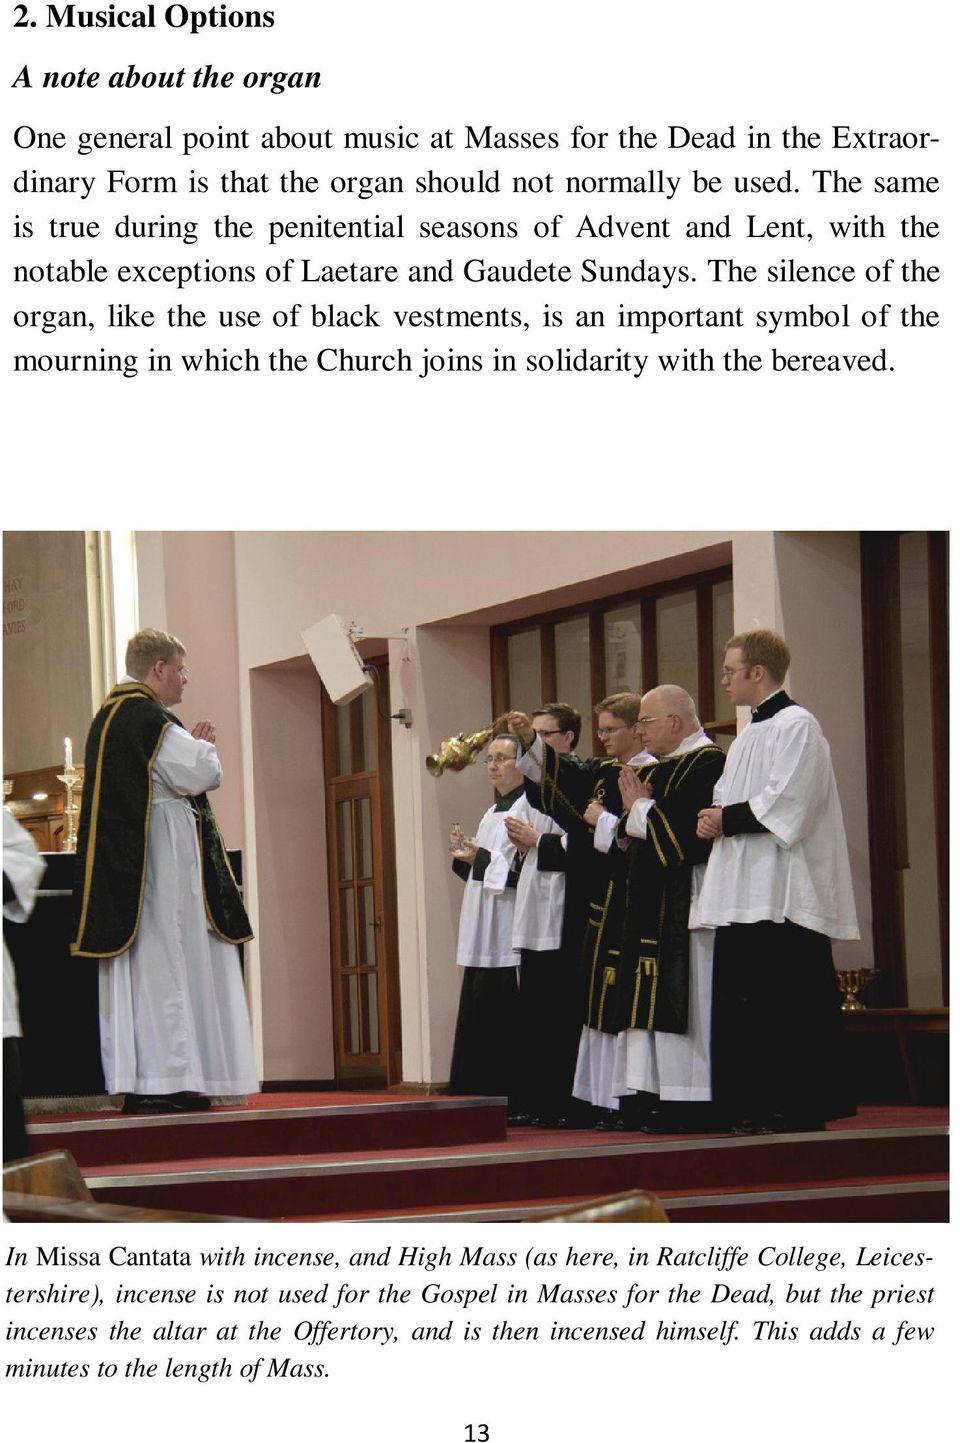 The silence of the organ, like the use of black vestments, is an important symbol of the mourning in which the Church joins in solidarity with the bereaved.